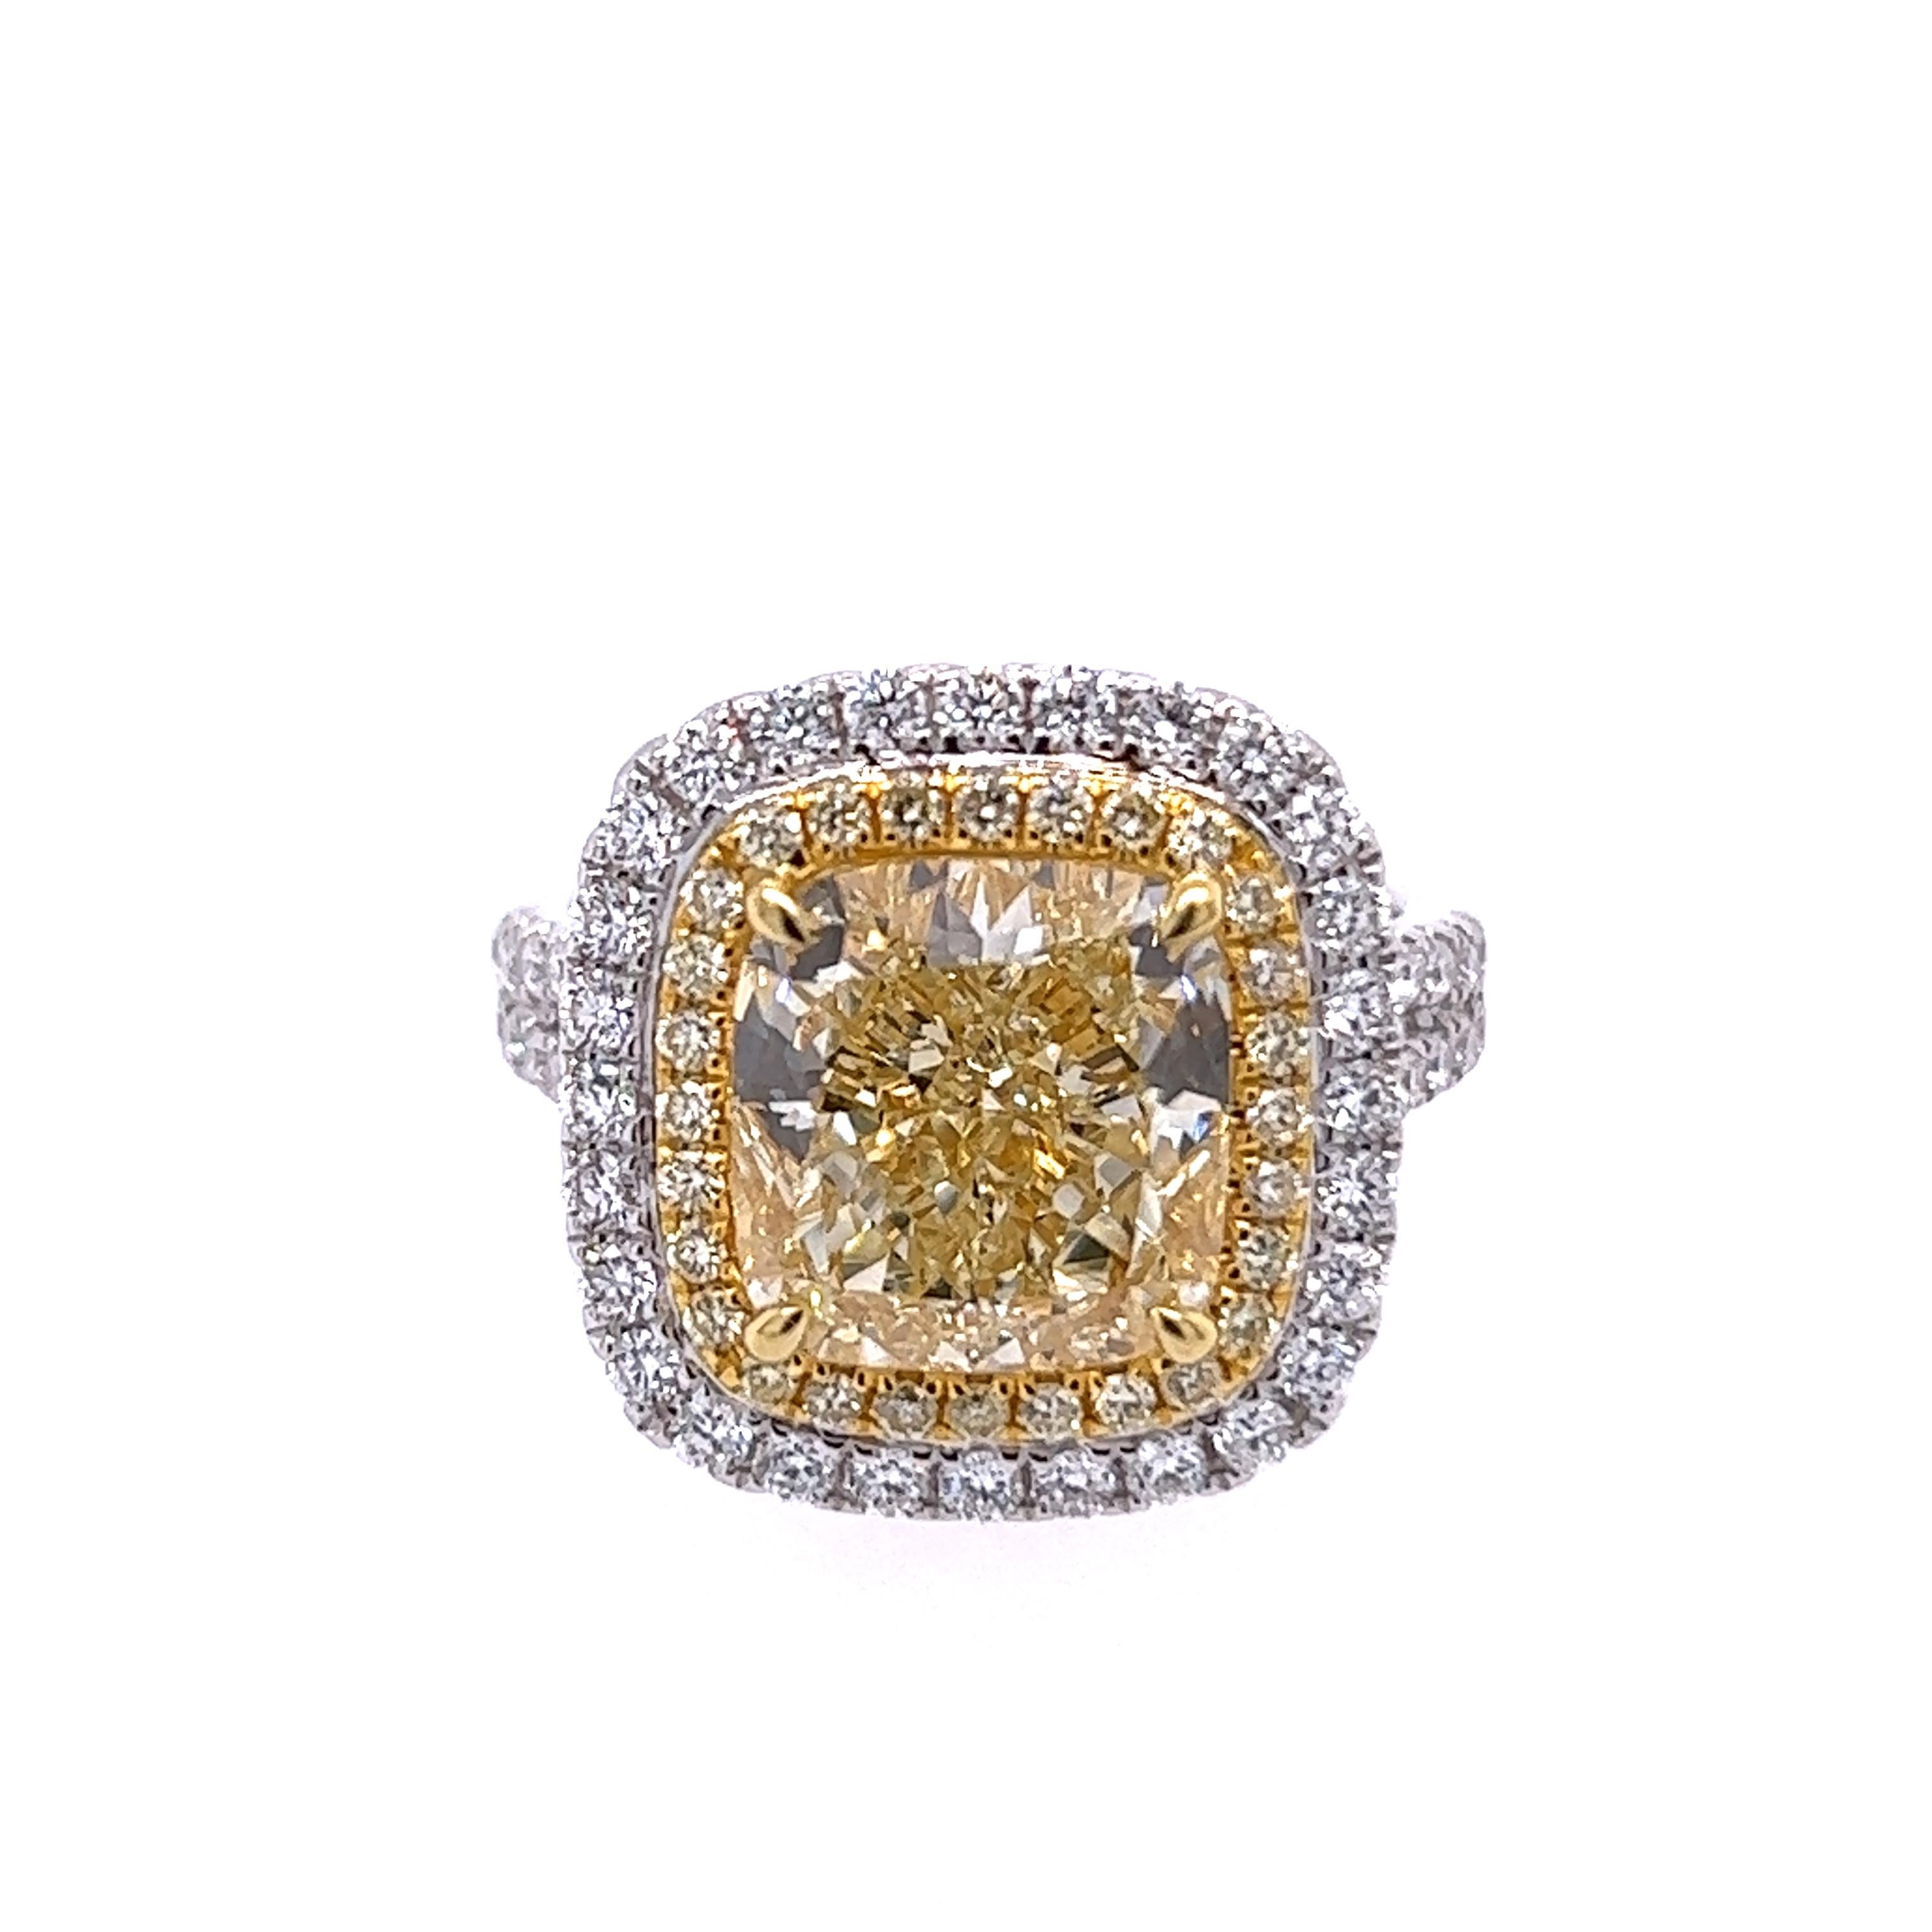 Rosenberg Diamonds & Co. 6.14 carat Cushion cut light yellow VS2 clarity is accompanied by a GIA certificate. This incredible bright cushion is full of life and it is set in a handmade 18 karat white & yellow gold setting. This ring completes its